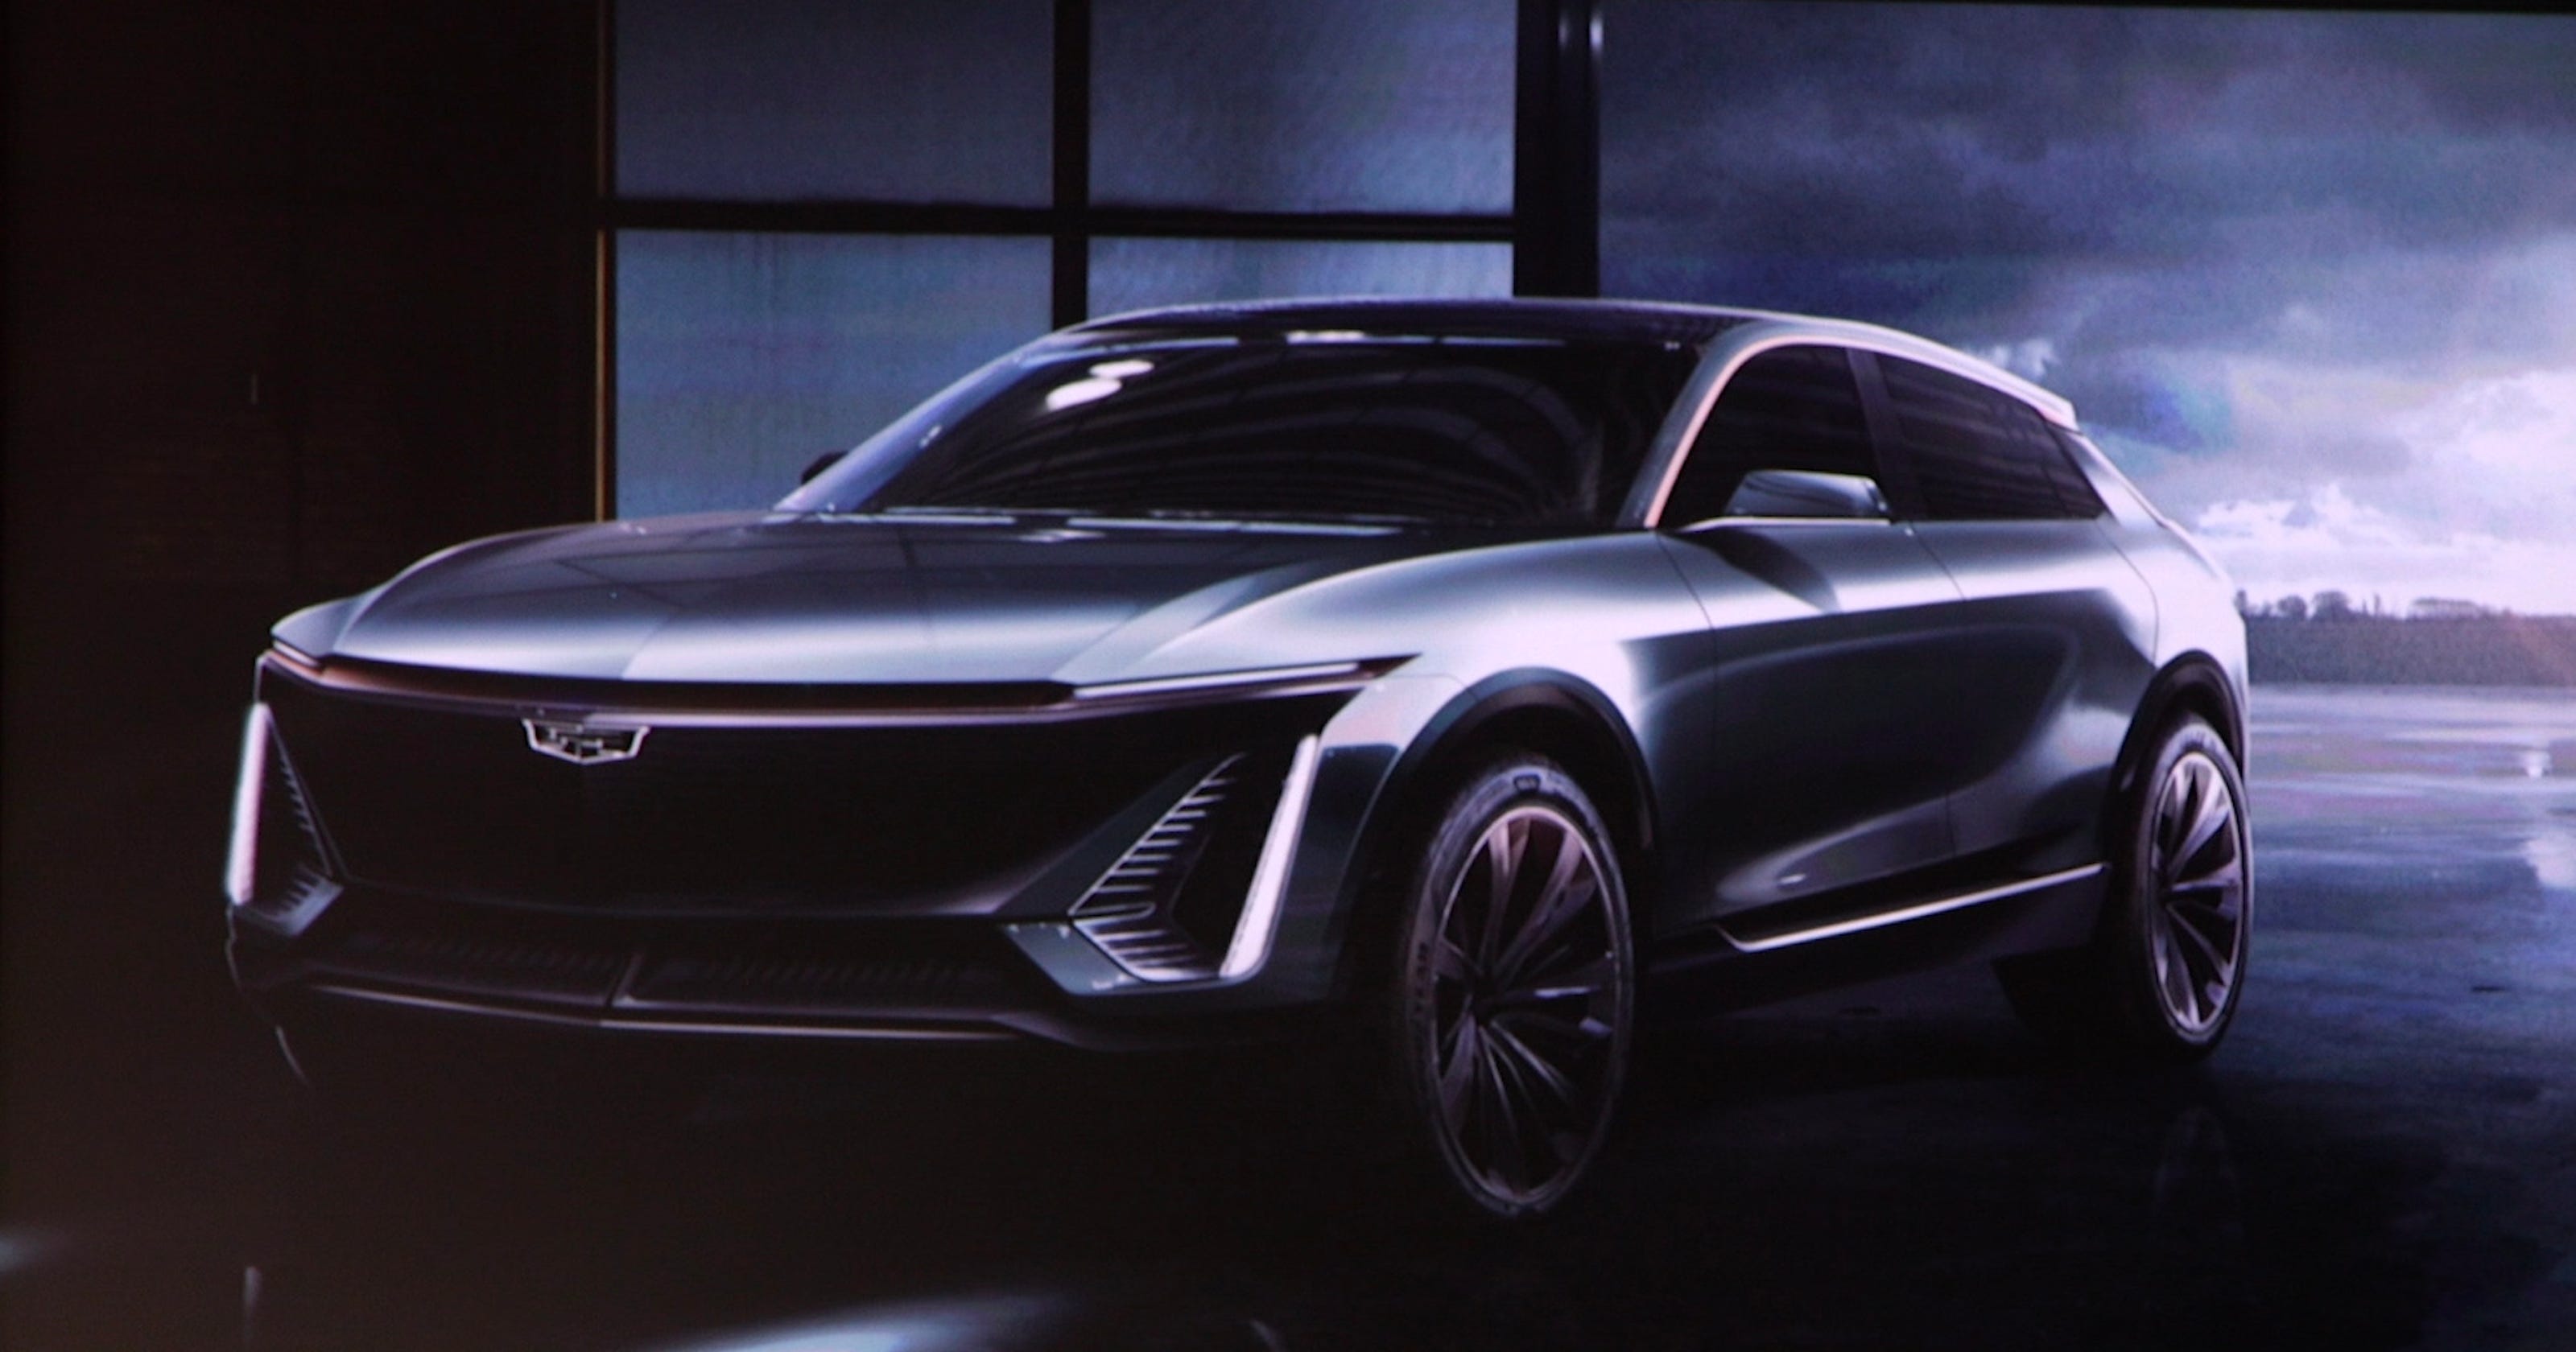 Buick, Chevrolet and Cadillac all want in on electric cars